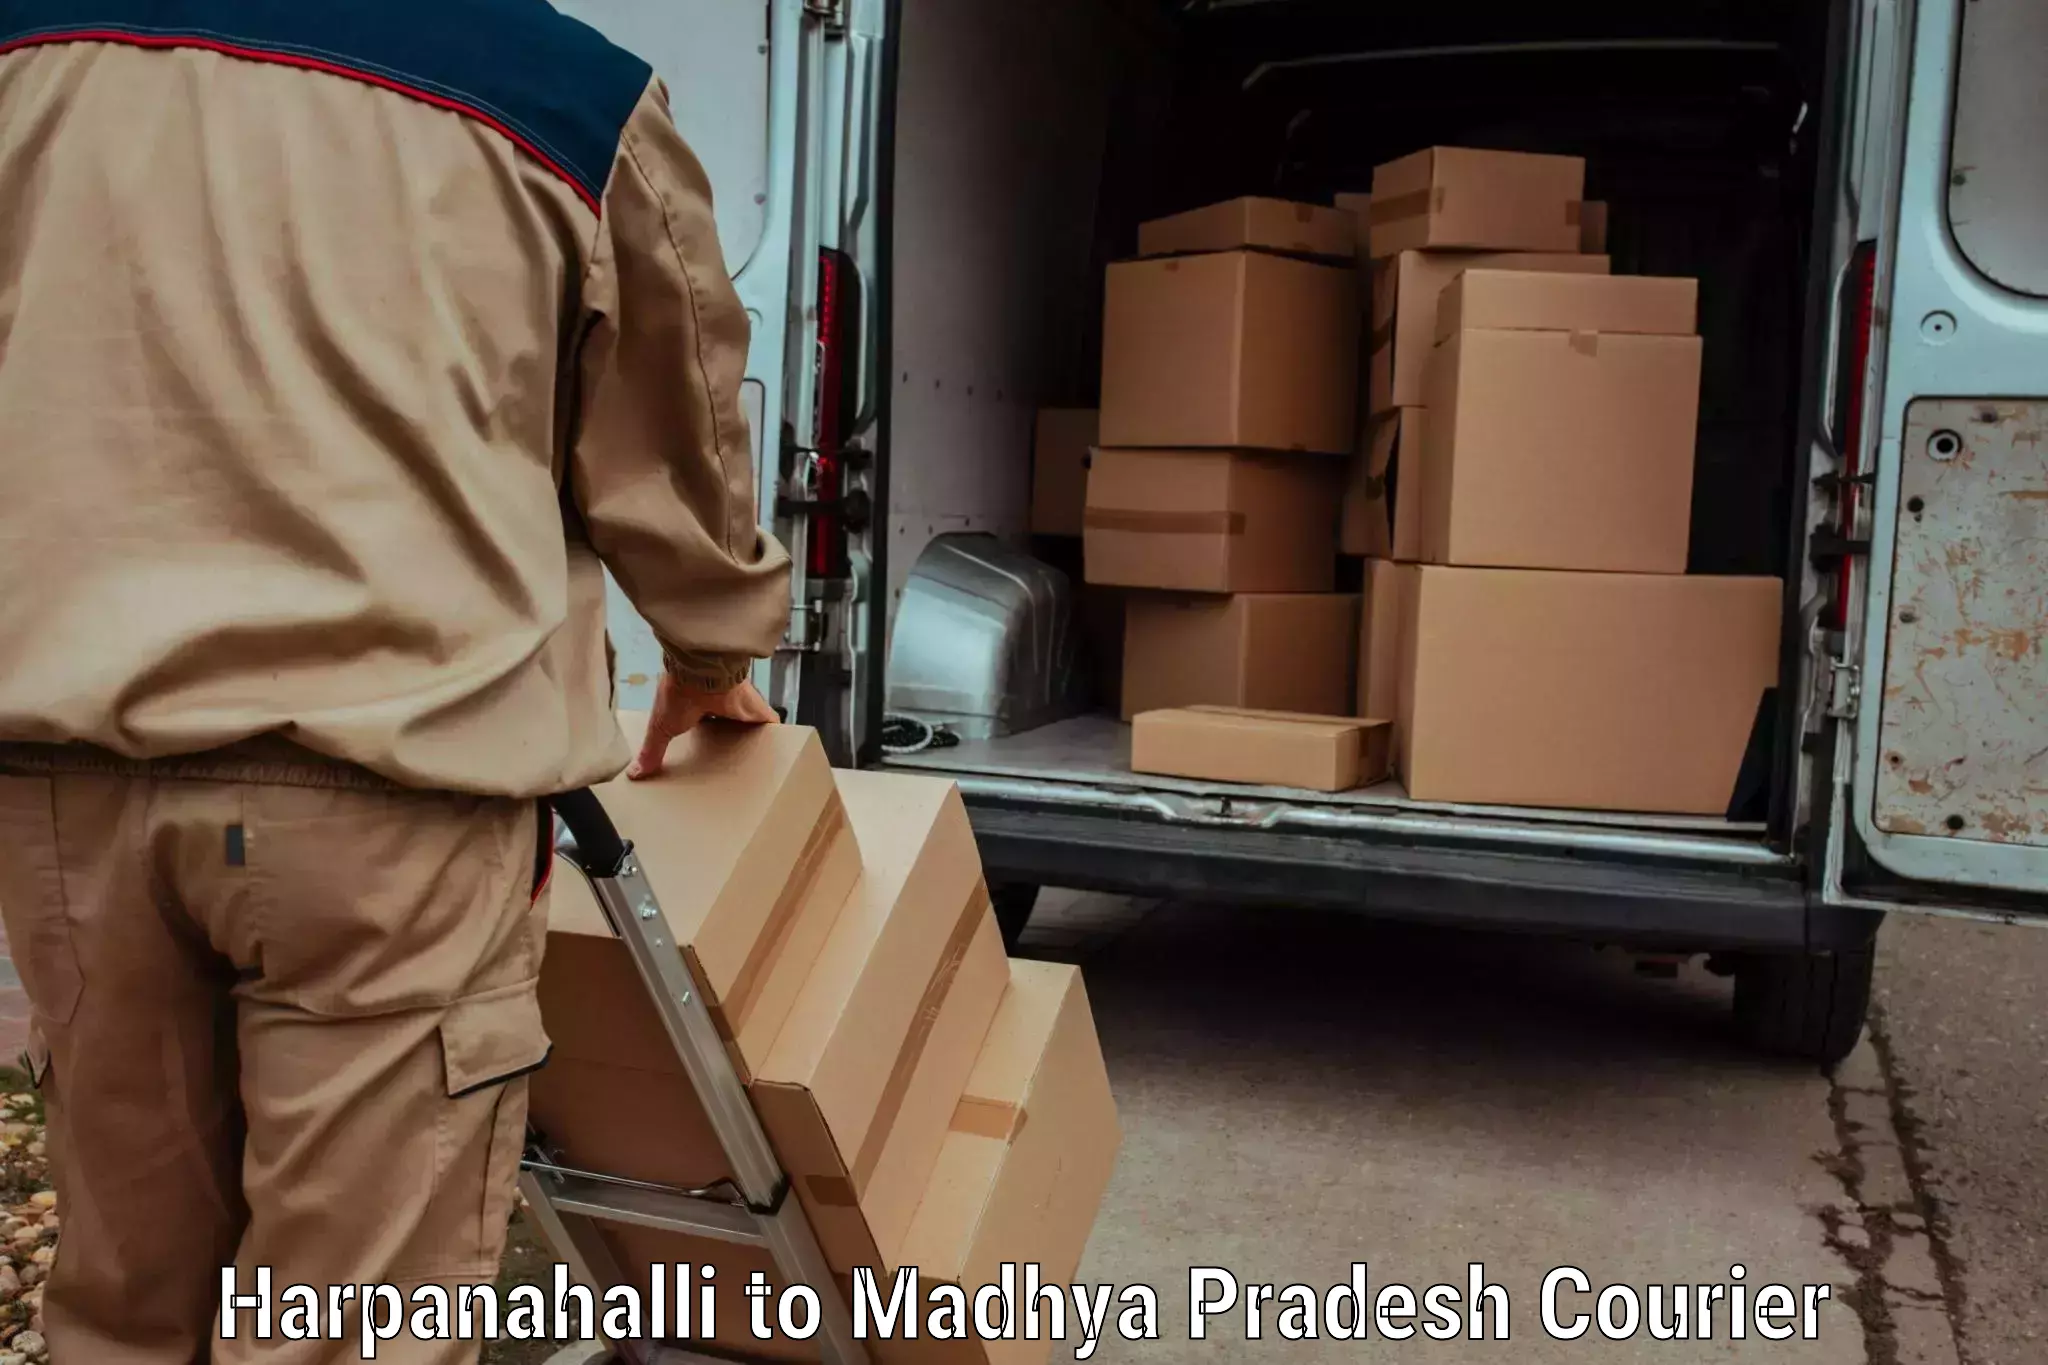 Professional parcel services Harpanahalli to Bhopal